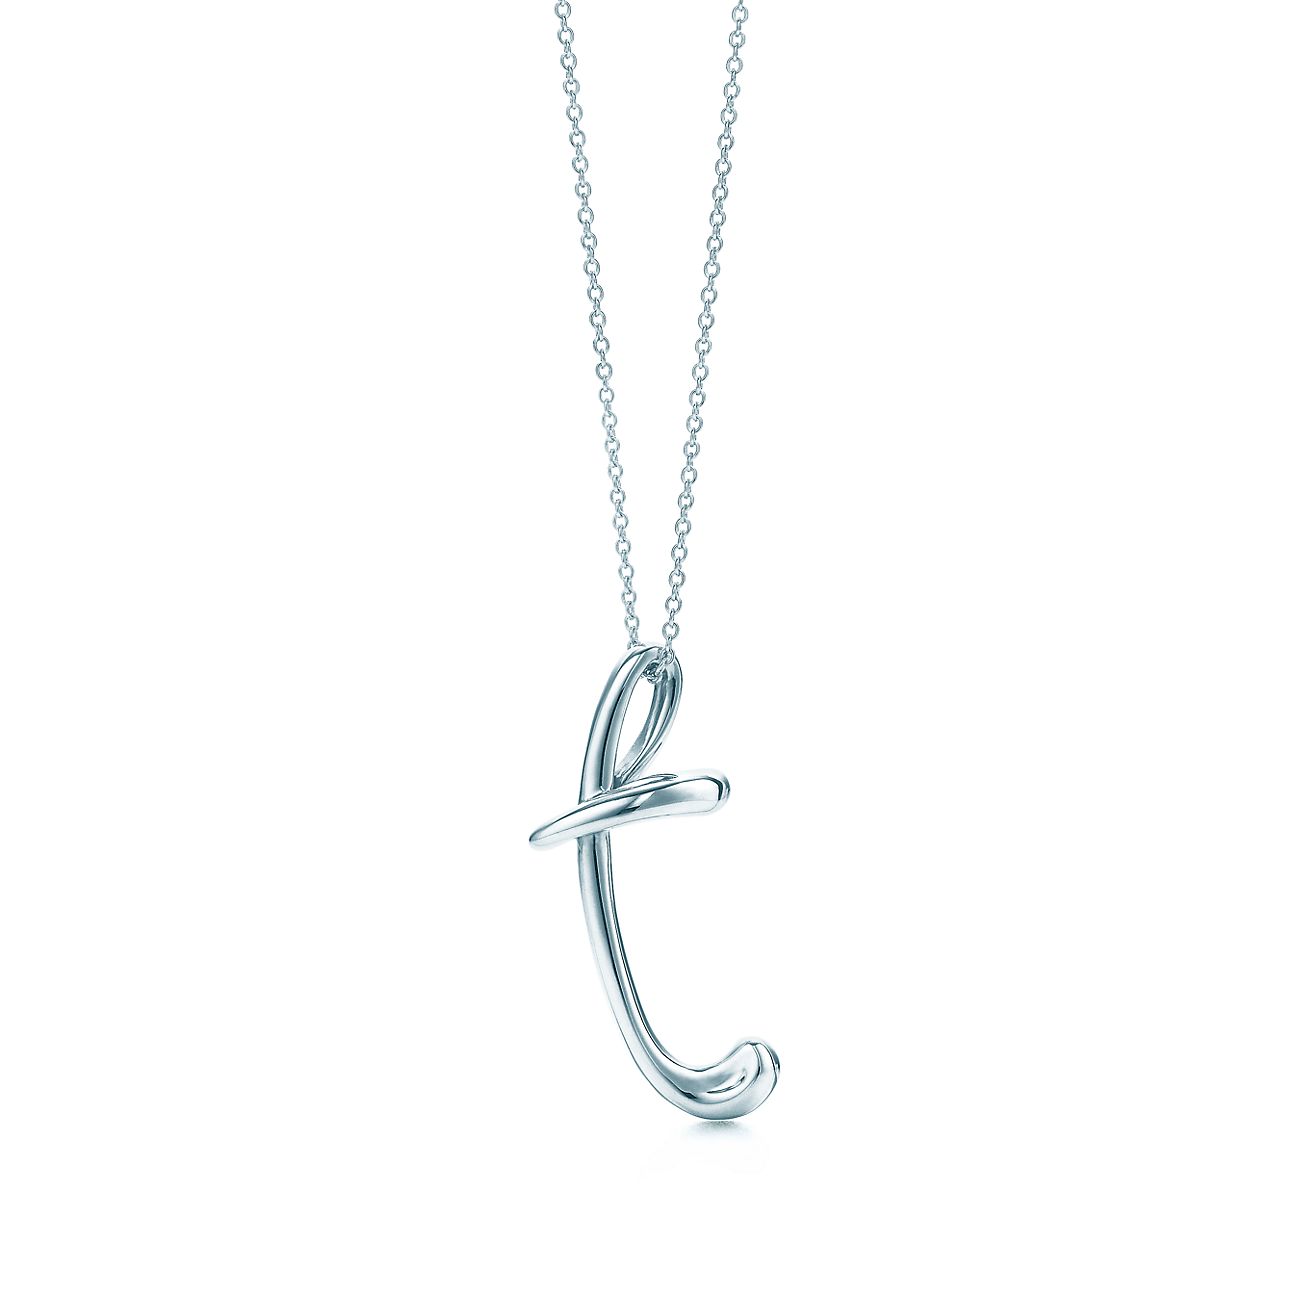 tiffany's initial necklace silver